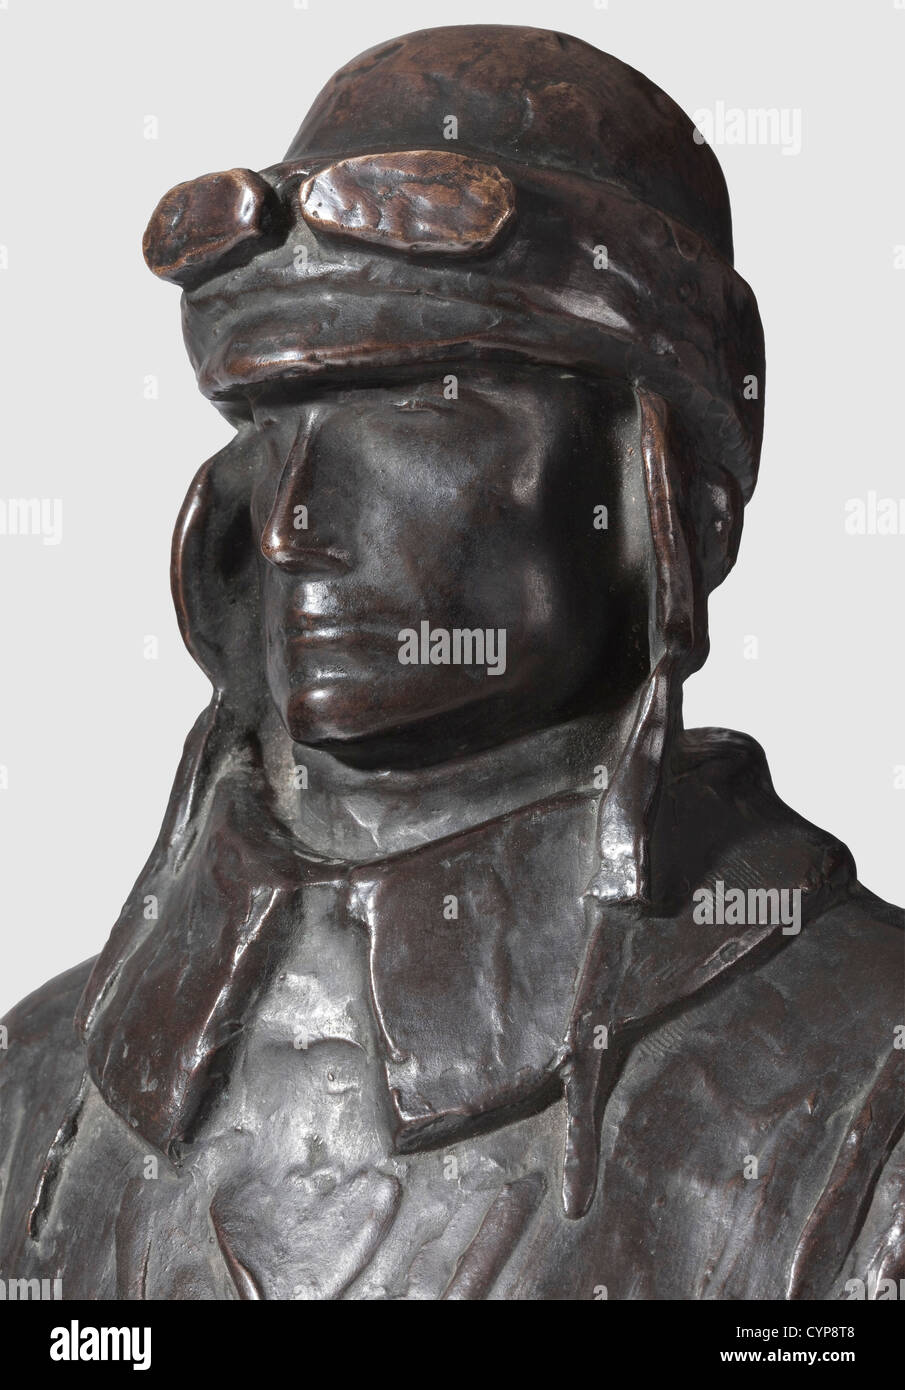 Milan Rastislav Stefánik (1880 - 1919) - a bronze figure, of the Slovakian politician and fighter pilot of the French Air Force in the First World War in flight gear. Height 76 cm, the base signed 'B. Kafka 1928' and with the foundry mark 'K. Bartak Praha XI'. M. R. Stefánik was a politician, astronomer, diplomat, adventurer, and officer who rose to the rank of general in the French armed forces. 1916 co-founder of the Czechoslovakian National Committee, at the begin of the war fighter pilot in Serbia, shot down with his aircraft in 1919 under unclear circumsta, Stock Photo